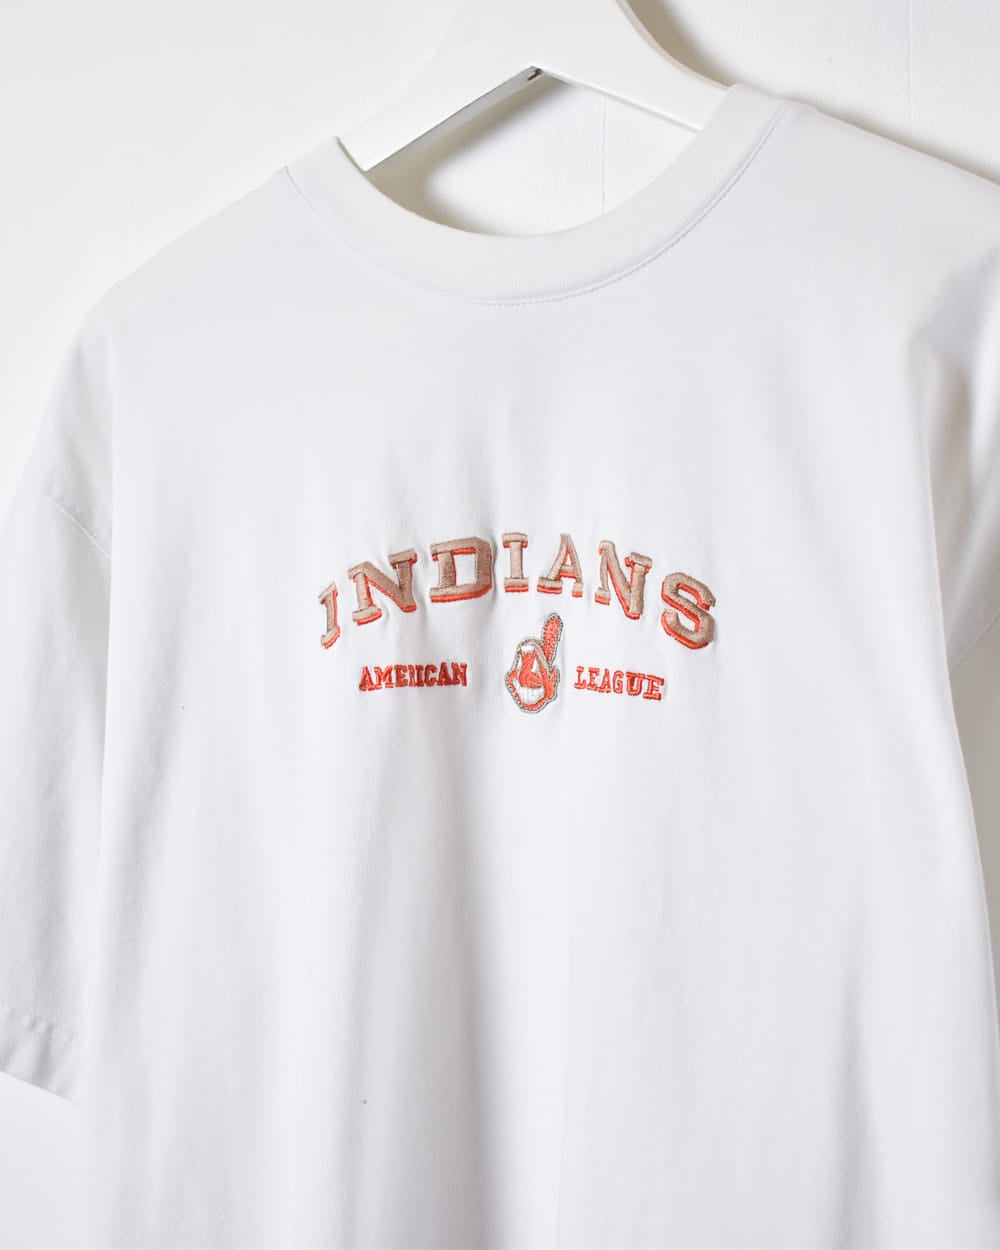 White Cleveland Indians American League T-Shirt - Large